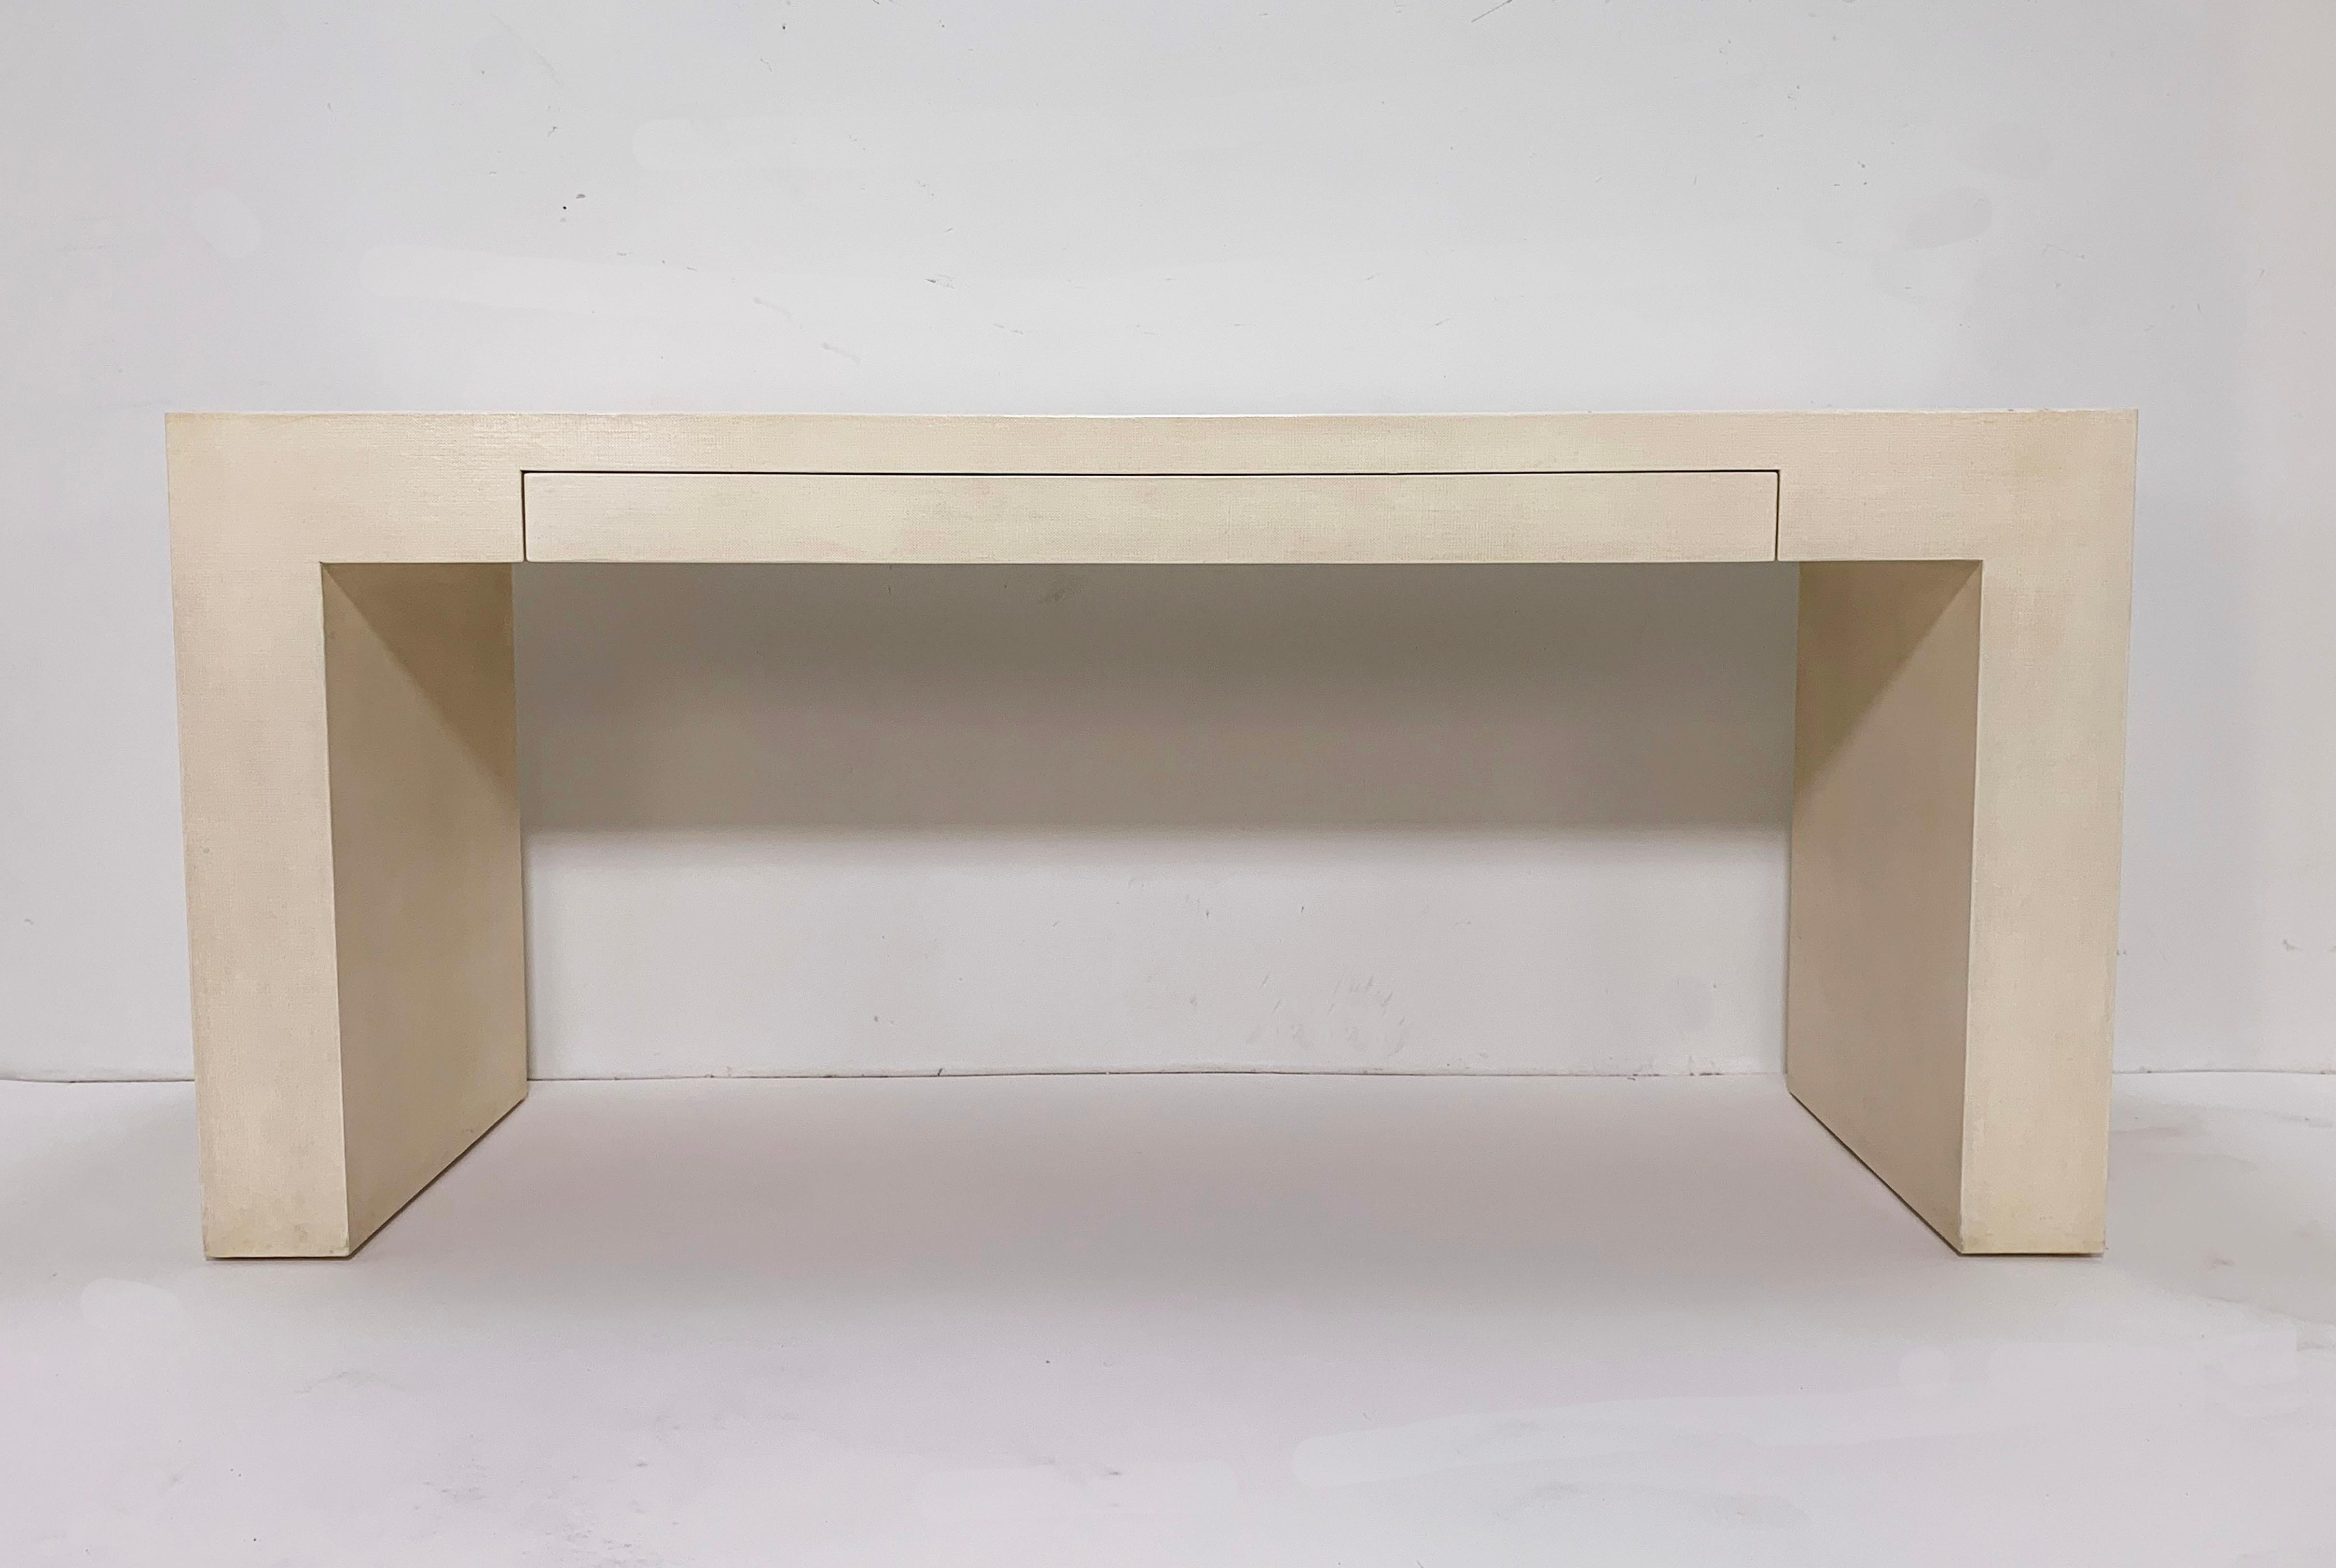 A postmodern lacquered linen console desk, circa 1980s, from the LA atelier of Flint Harrison & Jay Van Horn. A sleek architectural block form styling with elongated central pencil drawer from the duo who were highly influential in the furniture